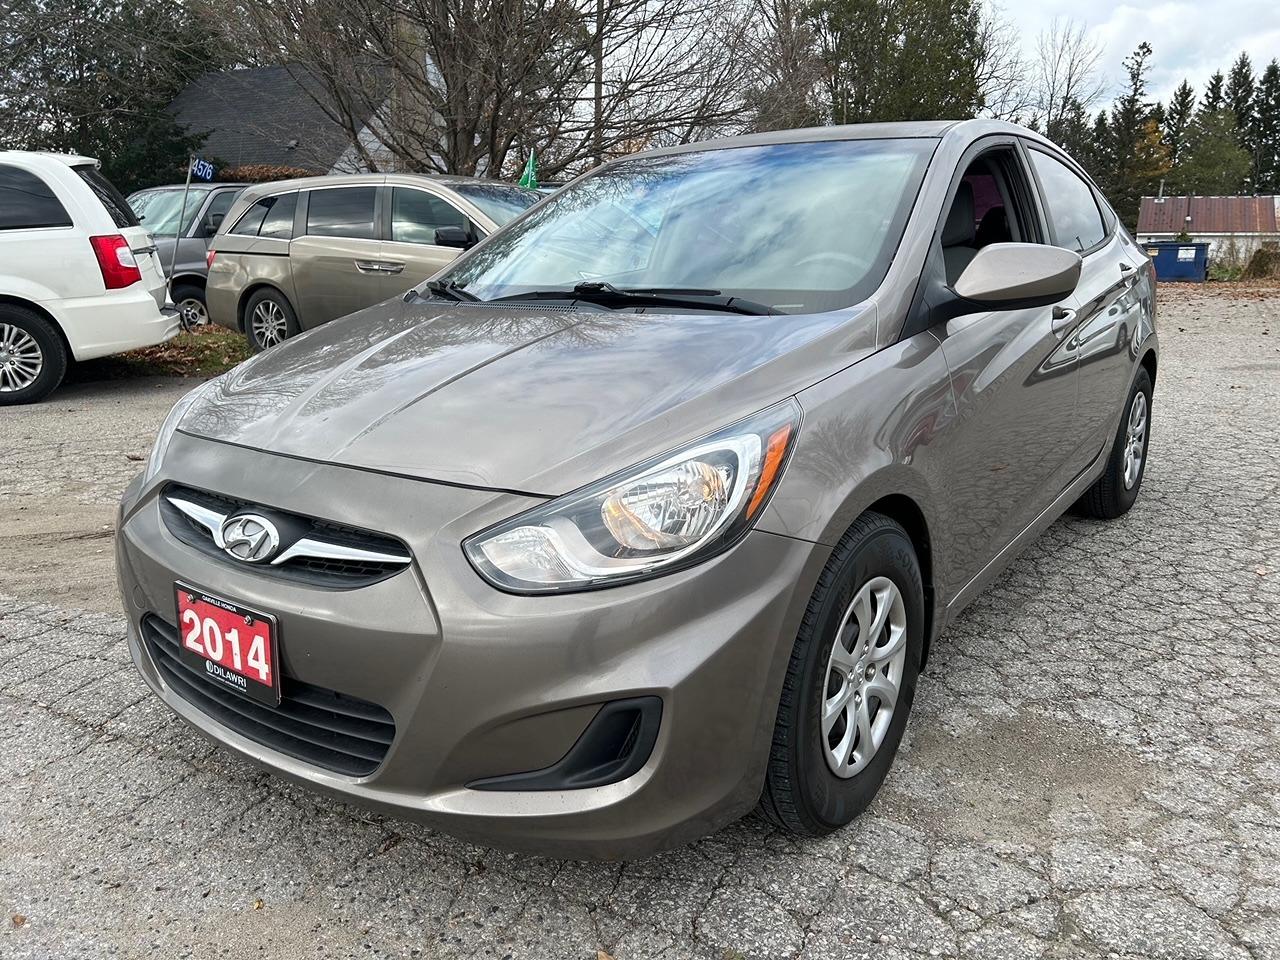 2014 Hyundai Accent GL*Auto*1.6L*4 Cyl*Exc Cond*166 Low Kms*No Acc*Cer - Photo #1